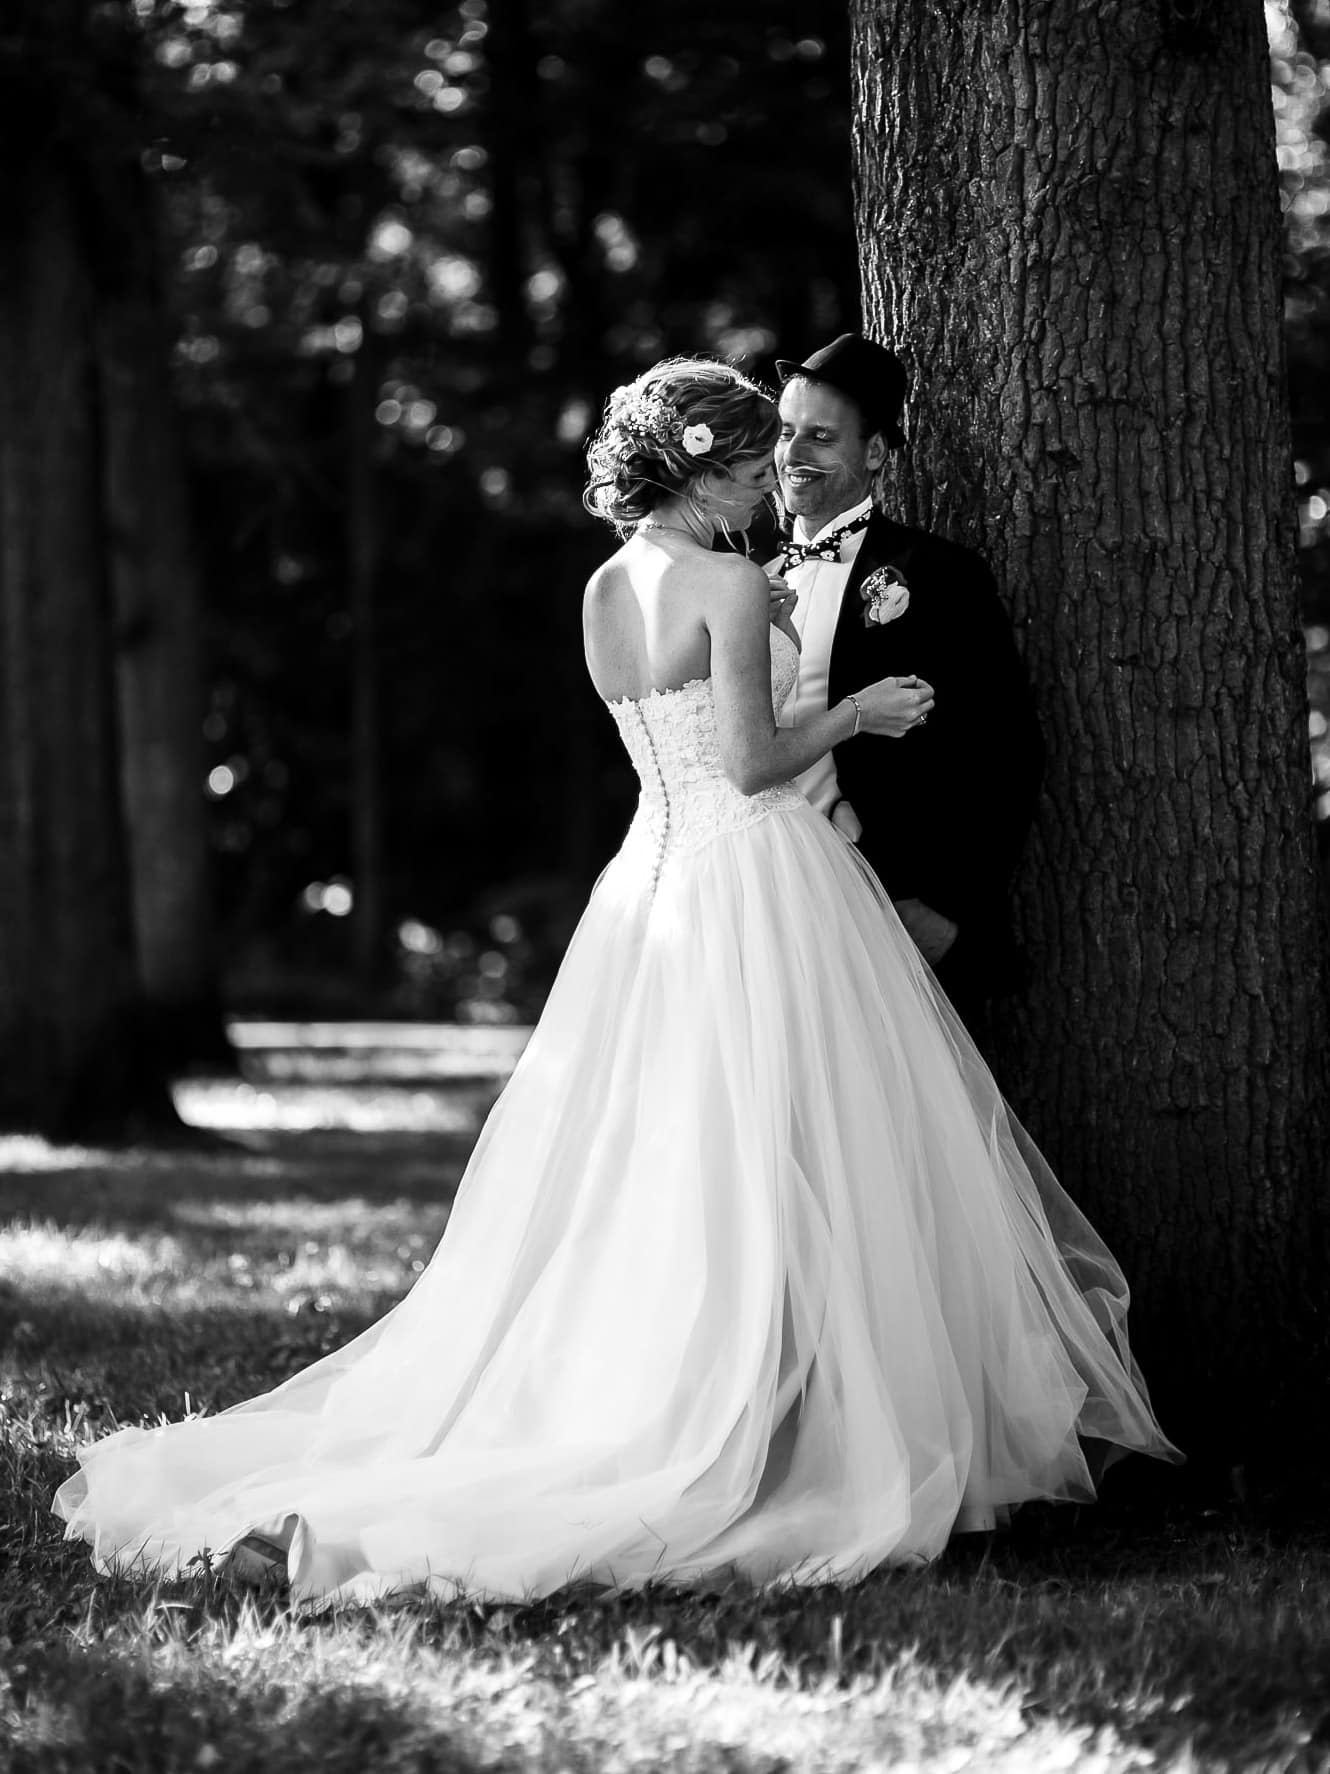 Black-and-white wedding photography of a bride and groom cuddling under a tree.